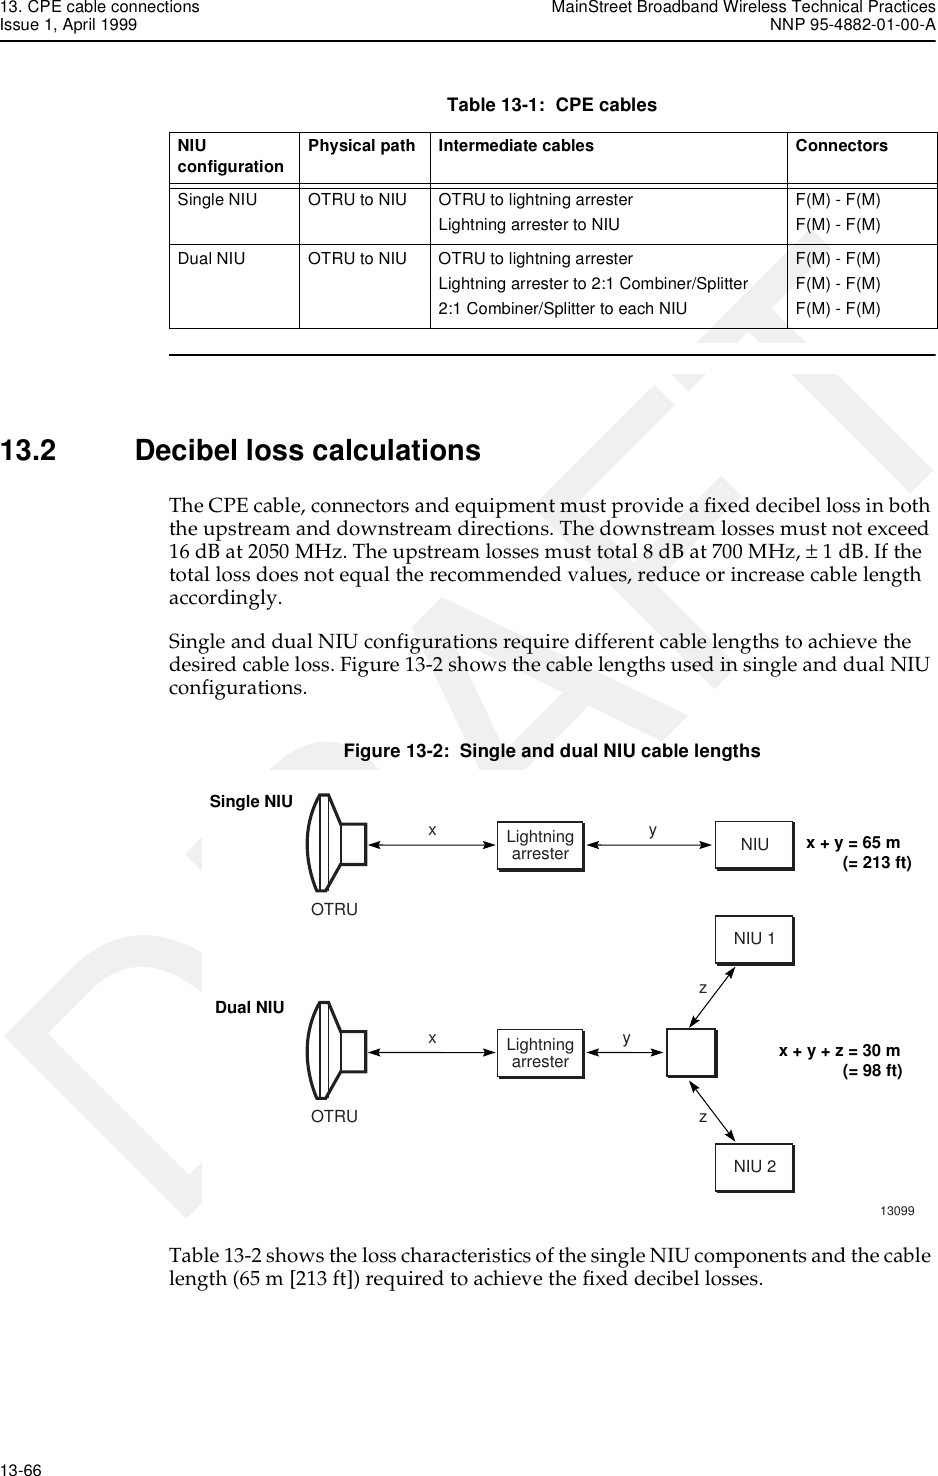 13. CPE cable connections MainStreet Broadband Wireless Technical PracticesIssue 1, April 1999 NNP 95-4882-01-00-A13-66   DRAFTTable 13-1:  CPE cables13.2 Decibel loss calculationsThe CPE cable, connectors and equipment must provide a fixed decibel loss in both the upstream and downstream directions. The downstream losses must not exceed 16 dB at 2050 MHz. The upstream losses must total 8 dB at 700 MHz, ± 1dB. If the total loss does not equal the recommended values, reduce or increase cable length accordingly.Single and dual NIU configurations require different cable lengths to achieve the desired cable loss. Figure 13-2 shows the cable lengths used in single and dual NIU configurations.Figure 13-2:  Single and dual NIU cable lengthsTable 13-2 shows the loss characteristics of the single NIU components and the cable length (65 m [213 ft]) required to achieve the fixed decibel losses. NIU configuration Physical path Intermediate cables ConnectorsSingle NIU OTRU to NIU OTRU to lightning arresterLightning arrester to NIUF(M) - F(M)F(M) - F(M)Dual NIU OTRU to NIU OTRU to lightning arresterLightning arrester to 2:1 Combiner/Splitter2:1 Combiner/Splitter to each NIUF(M) - F(M)F(M) - F(M)F(M) - F(M)OTRUNIUNIU 1NIU 2LightningarresterSingle NIUDual NIU13099xyzzLightningarresterxyx + y + z = 30 mx + y = 65 m(= 213 ft)(= 98 ft)OTRU